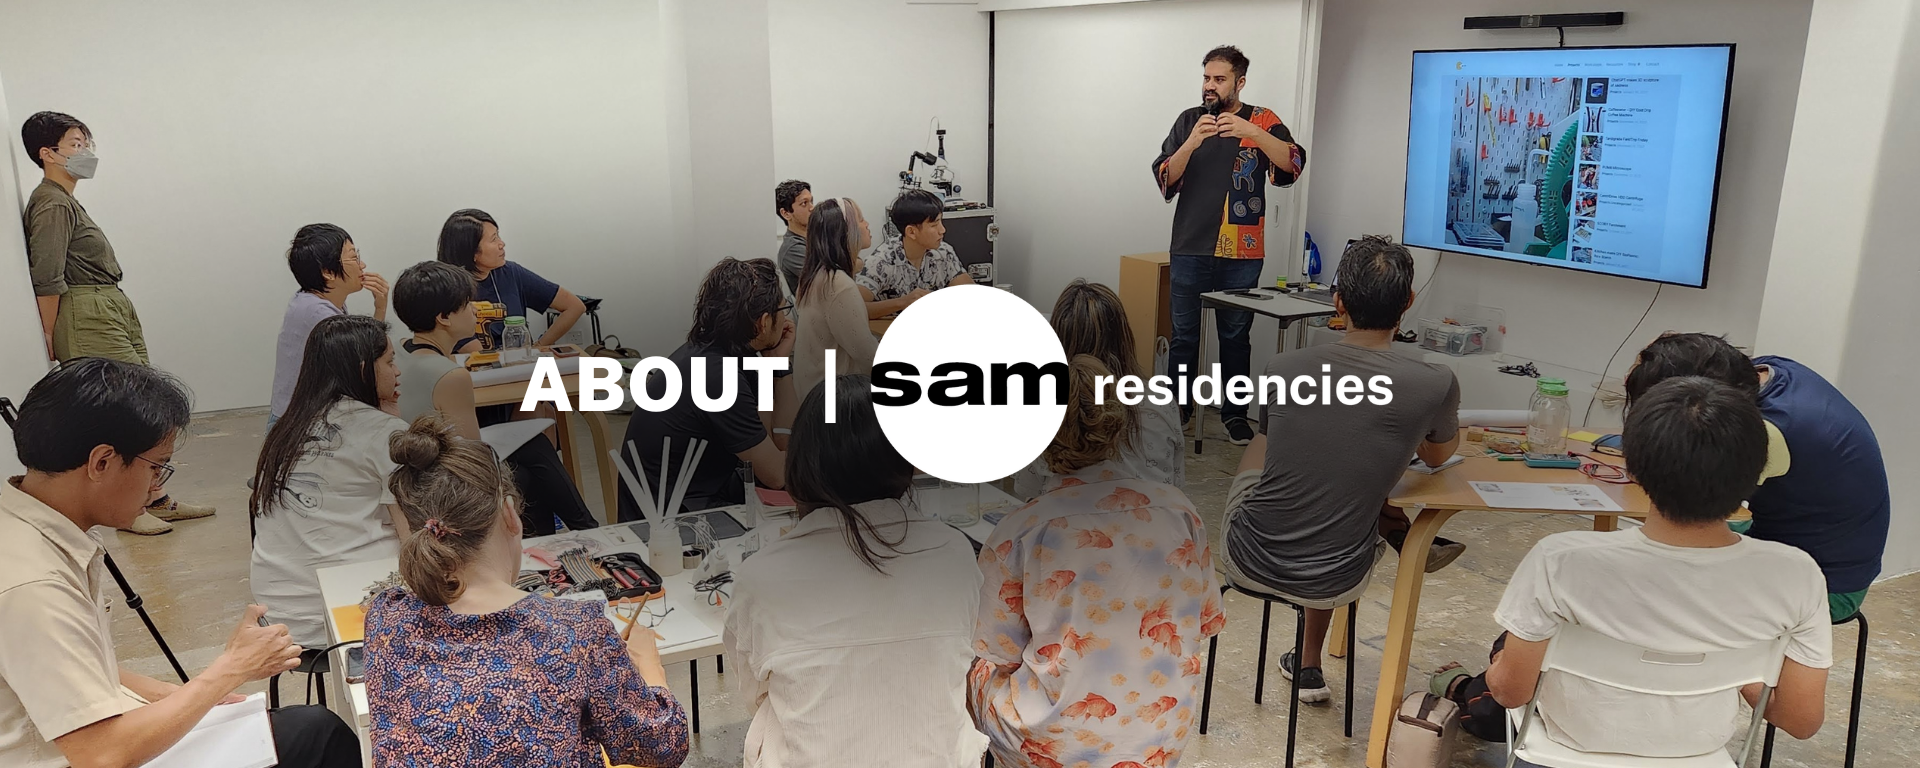 About Residencies